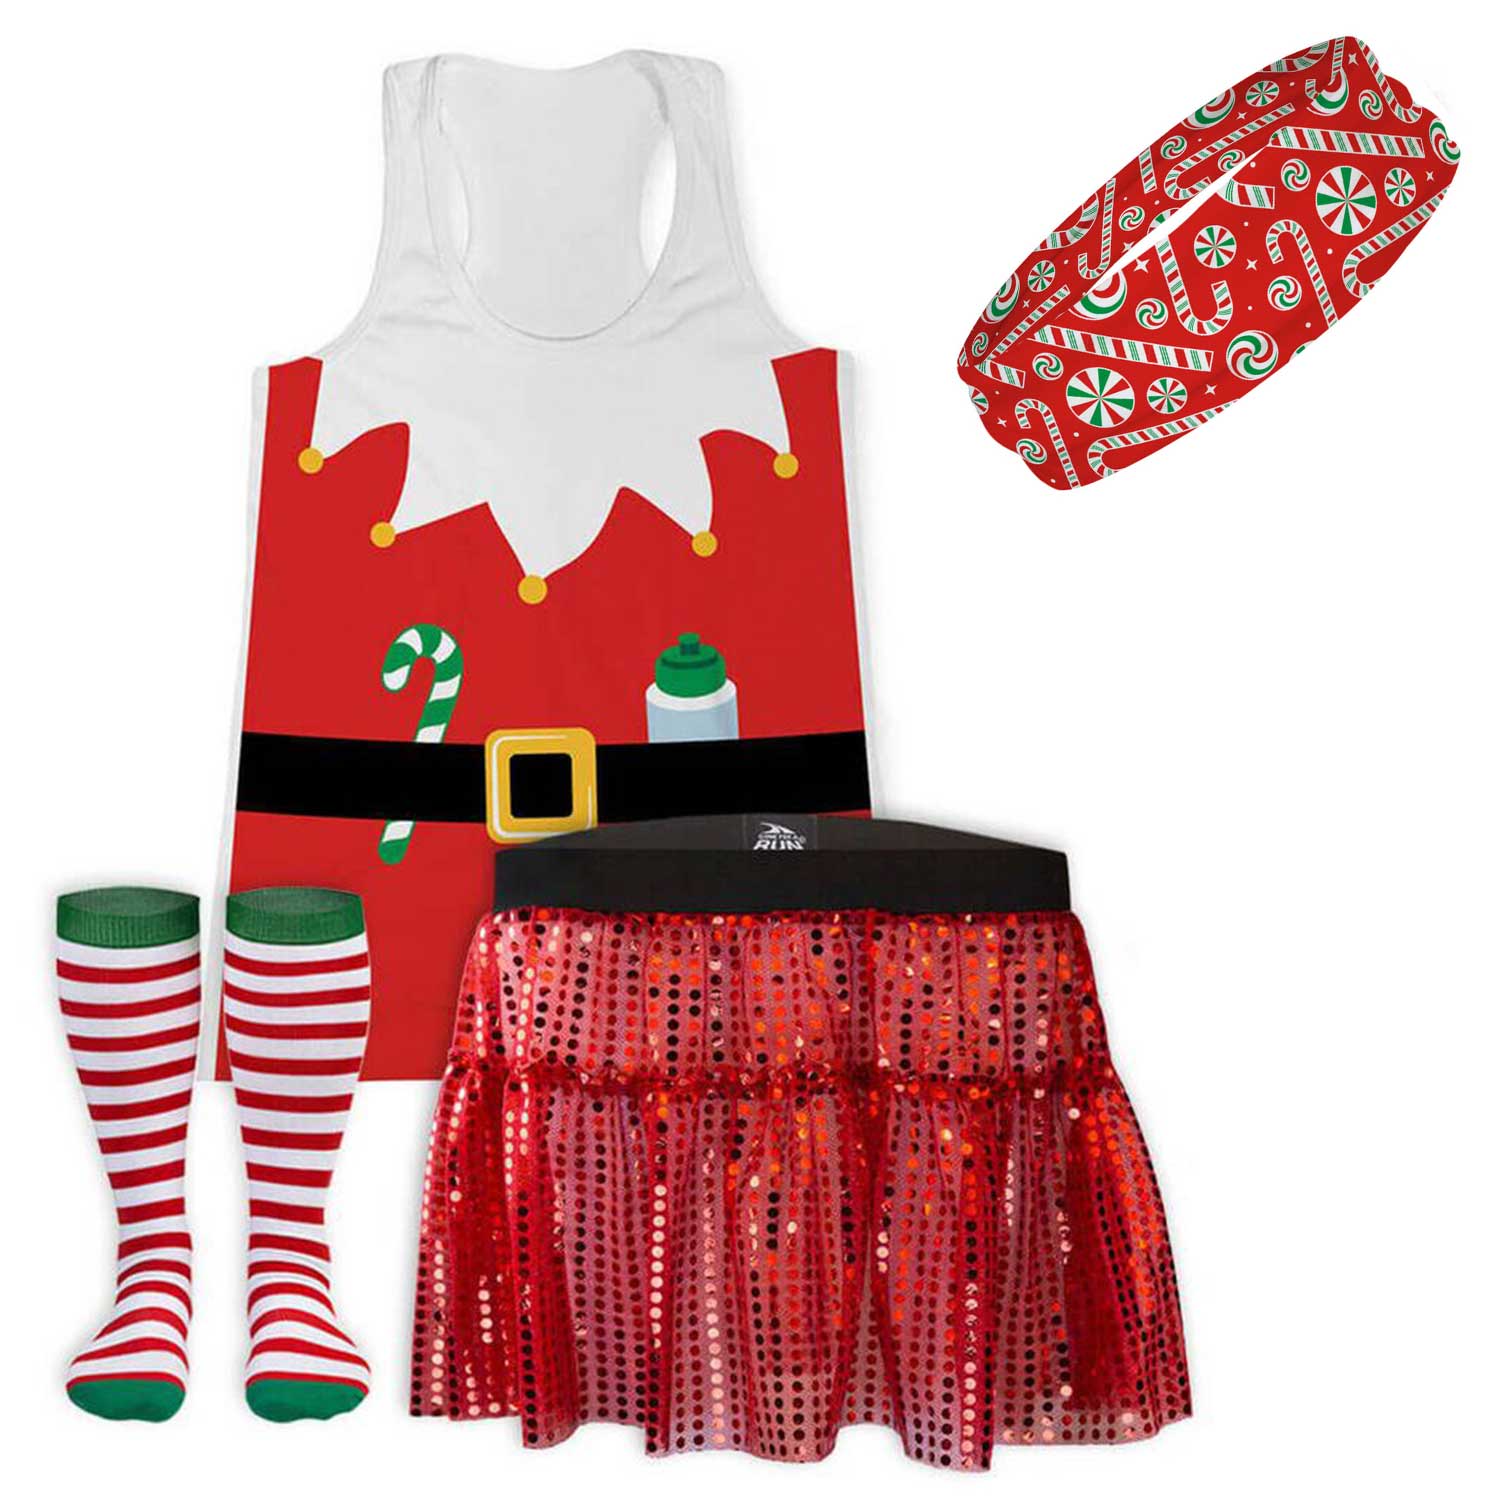 Mrs. Claus Runner Running Outfit | Gone For a Run